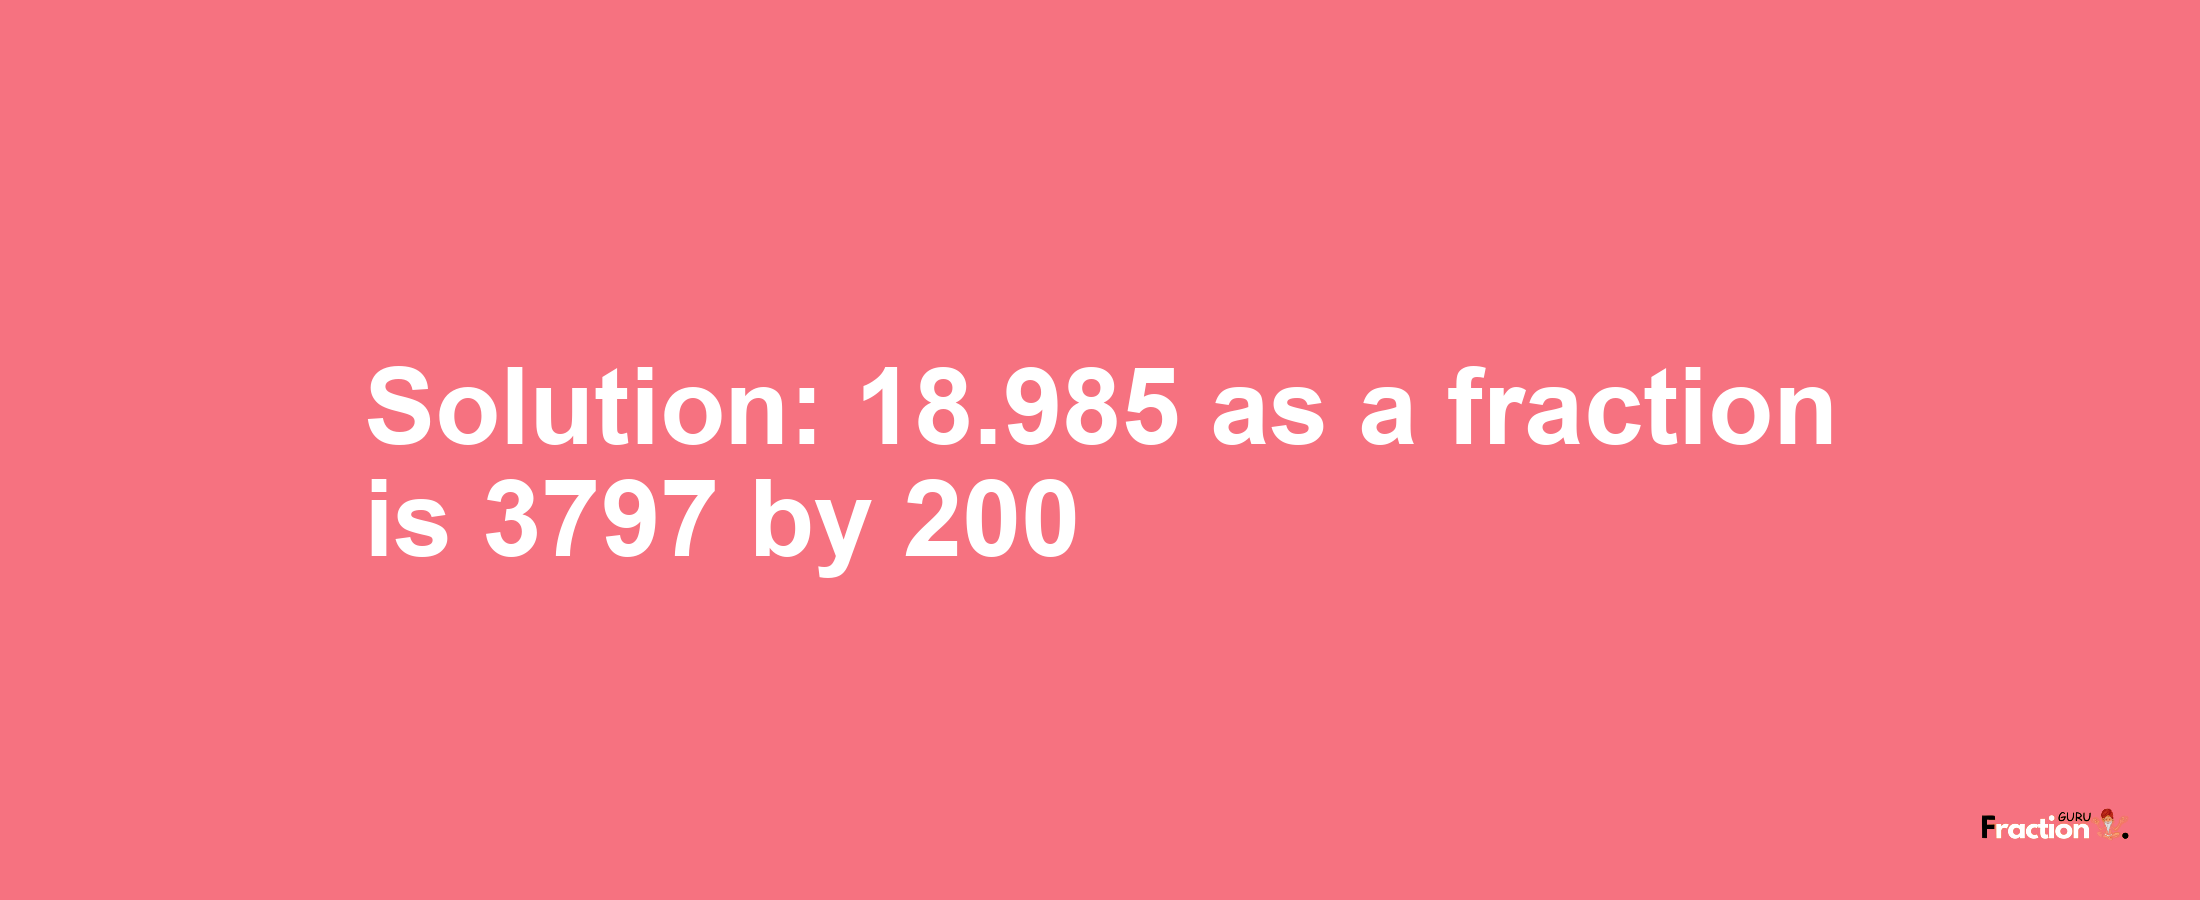 Solution:18.985 as a fraction is 3797/200